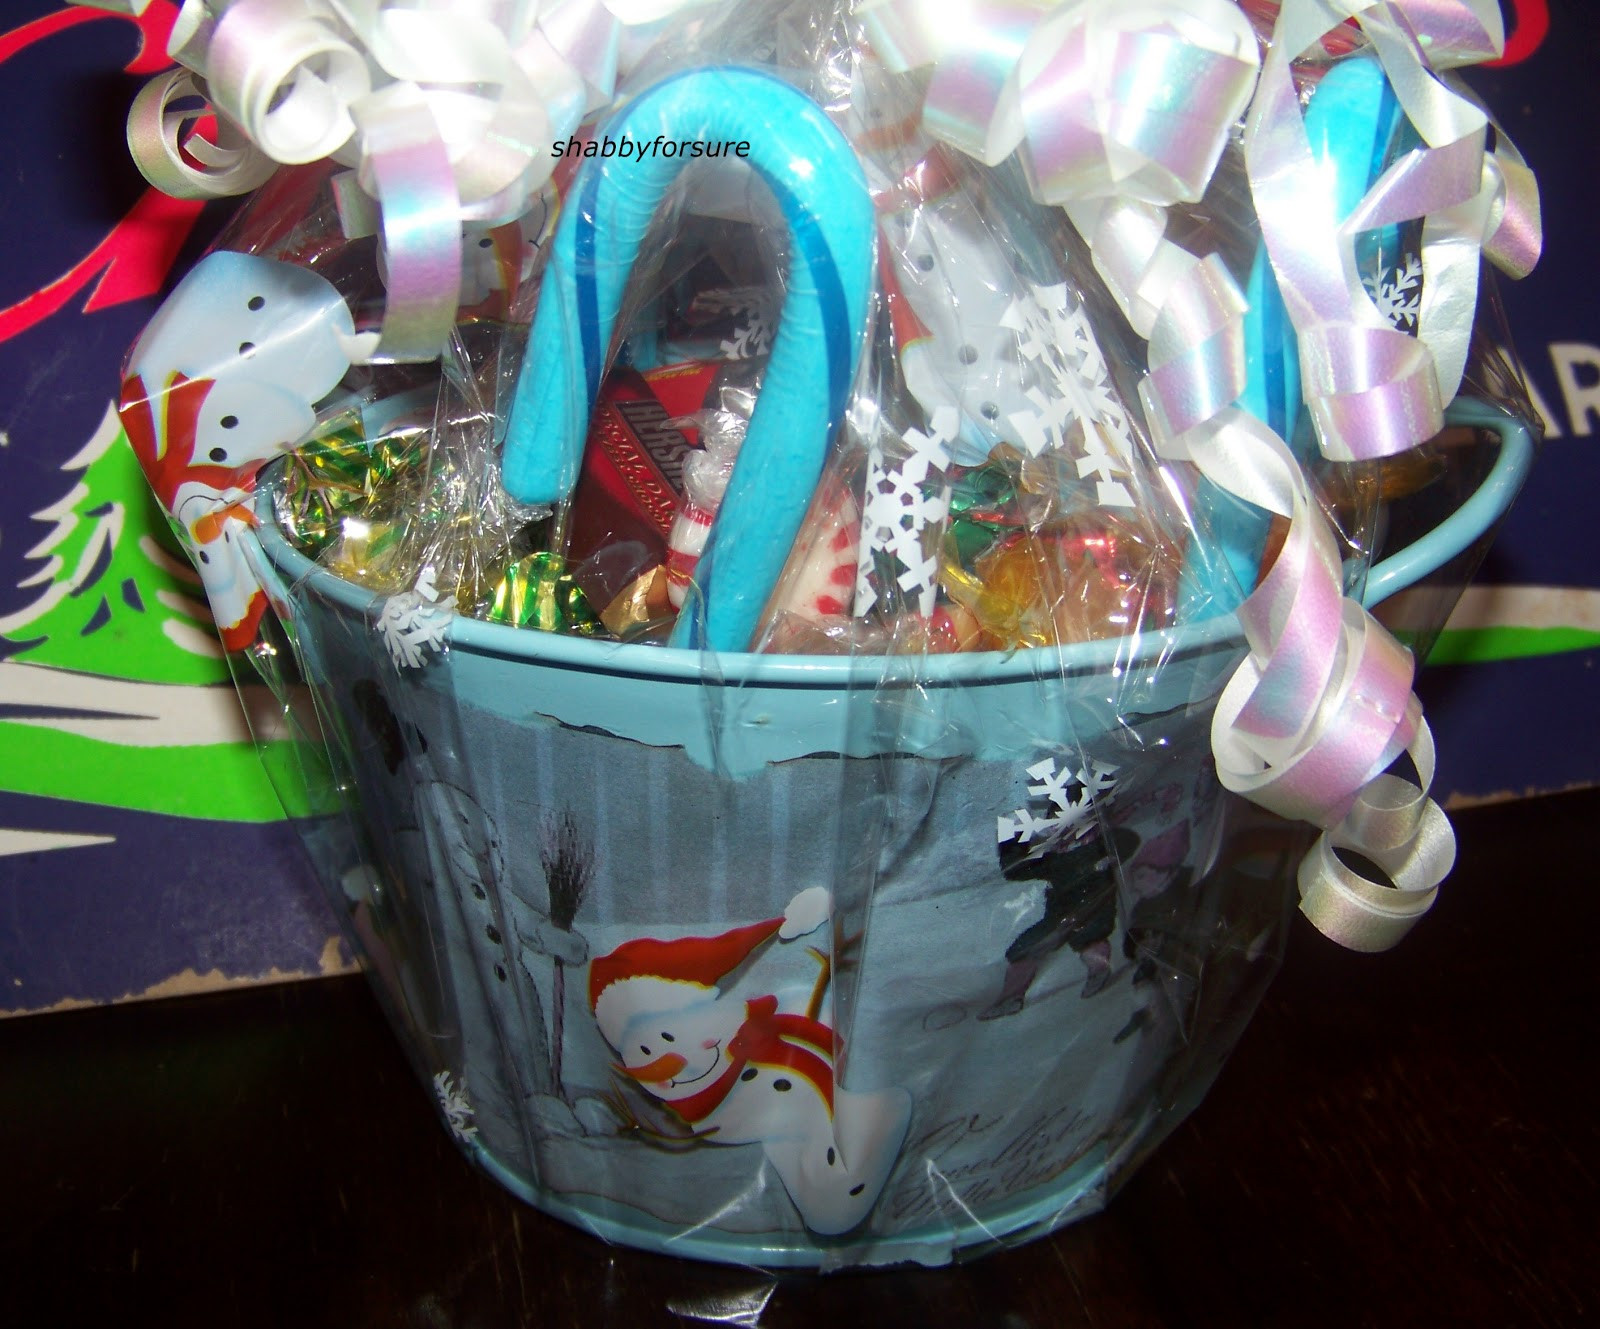 Best ideas about Dollar Gift Ideas
. Save or Pin Shabby For Sure Dollar Tree Gift Tub Now.